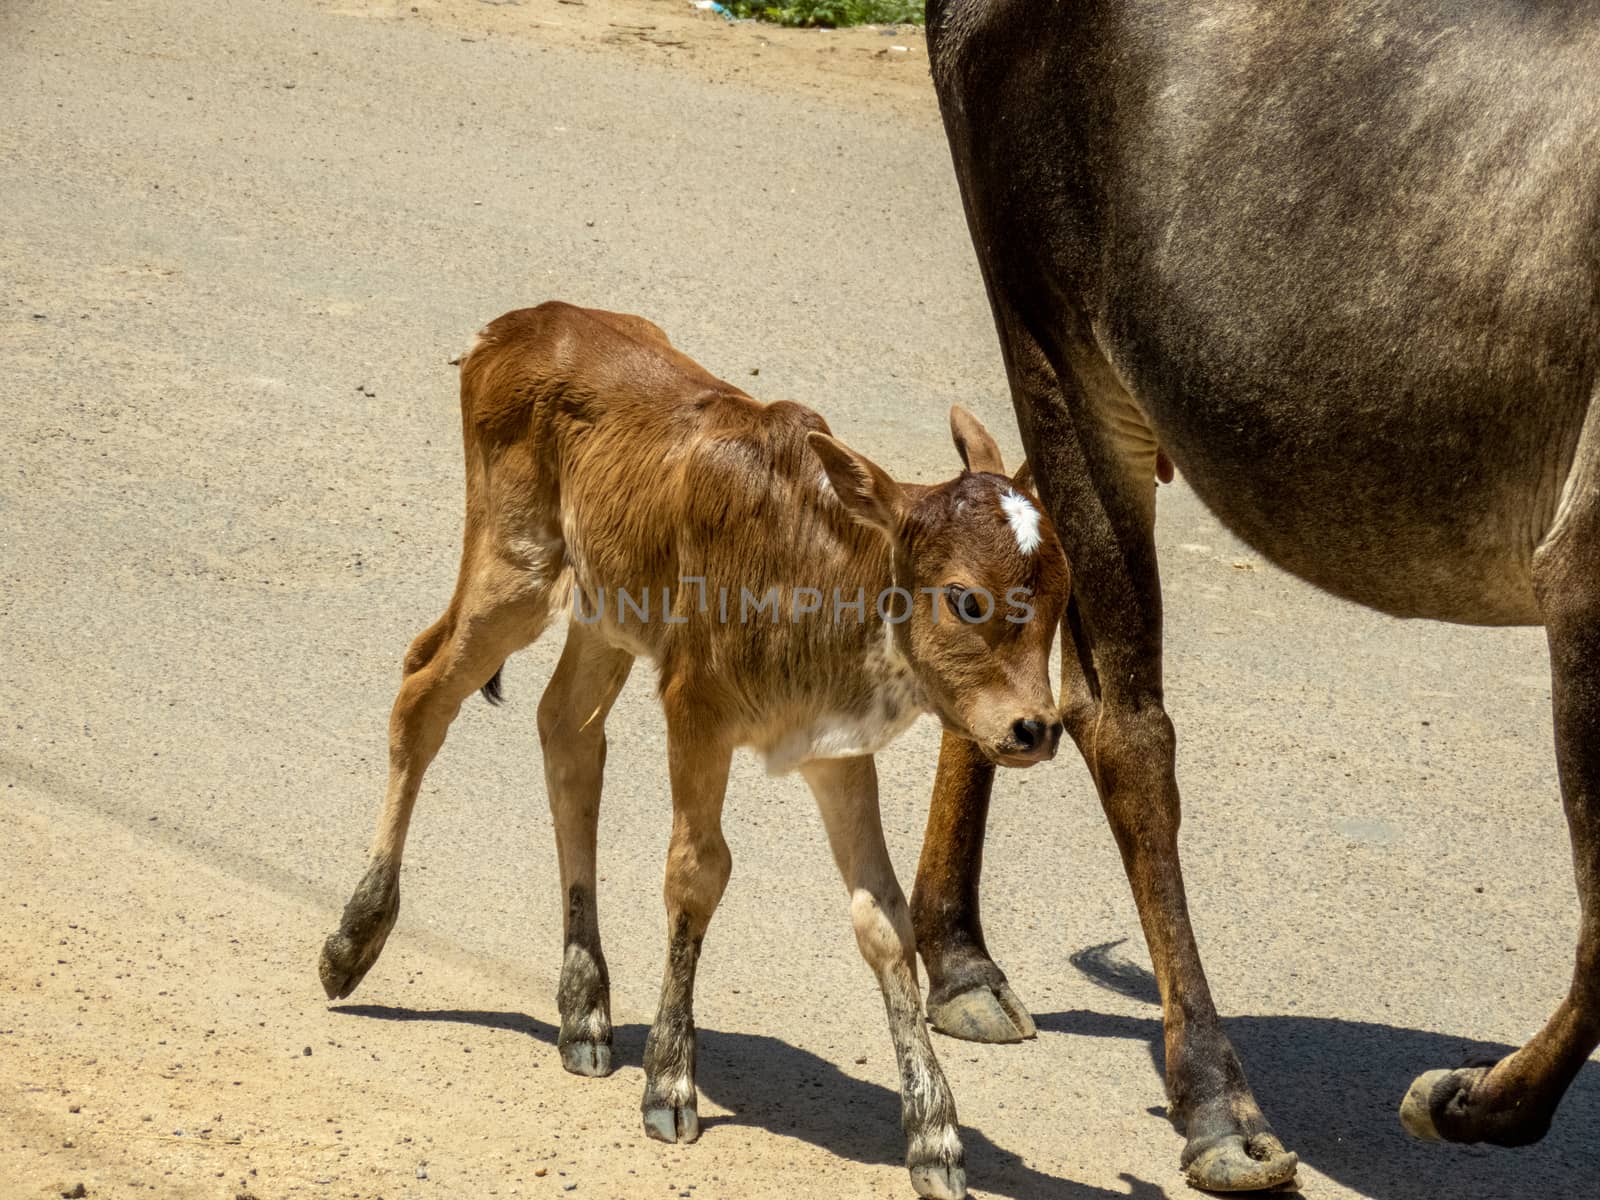 A cow's calf walking on a road with a cow